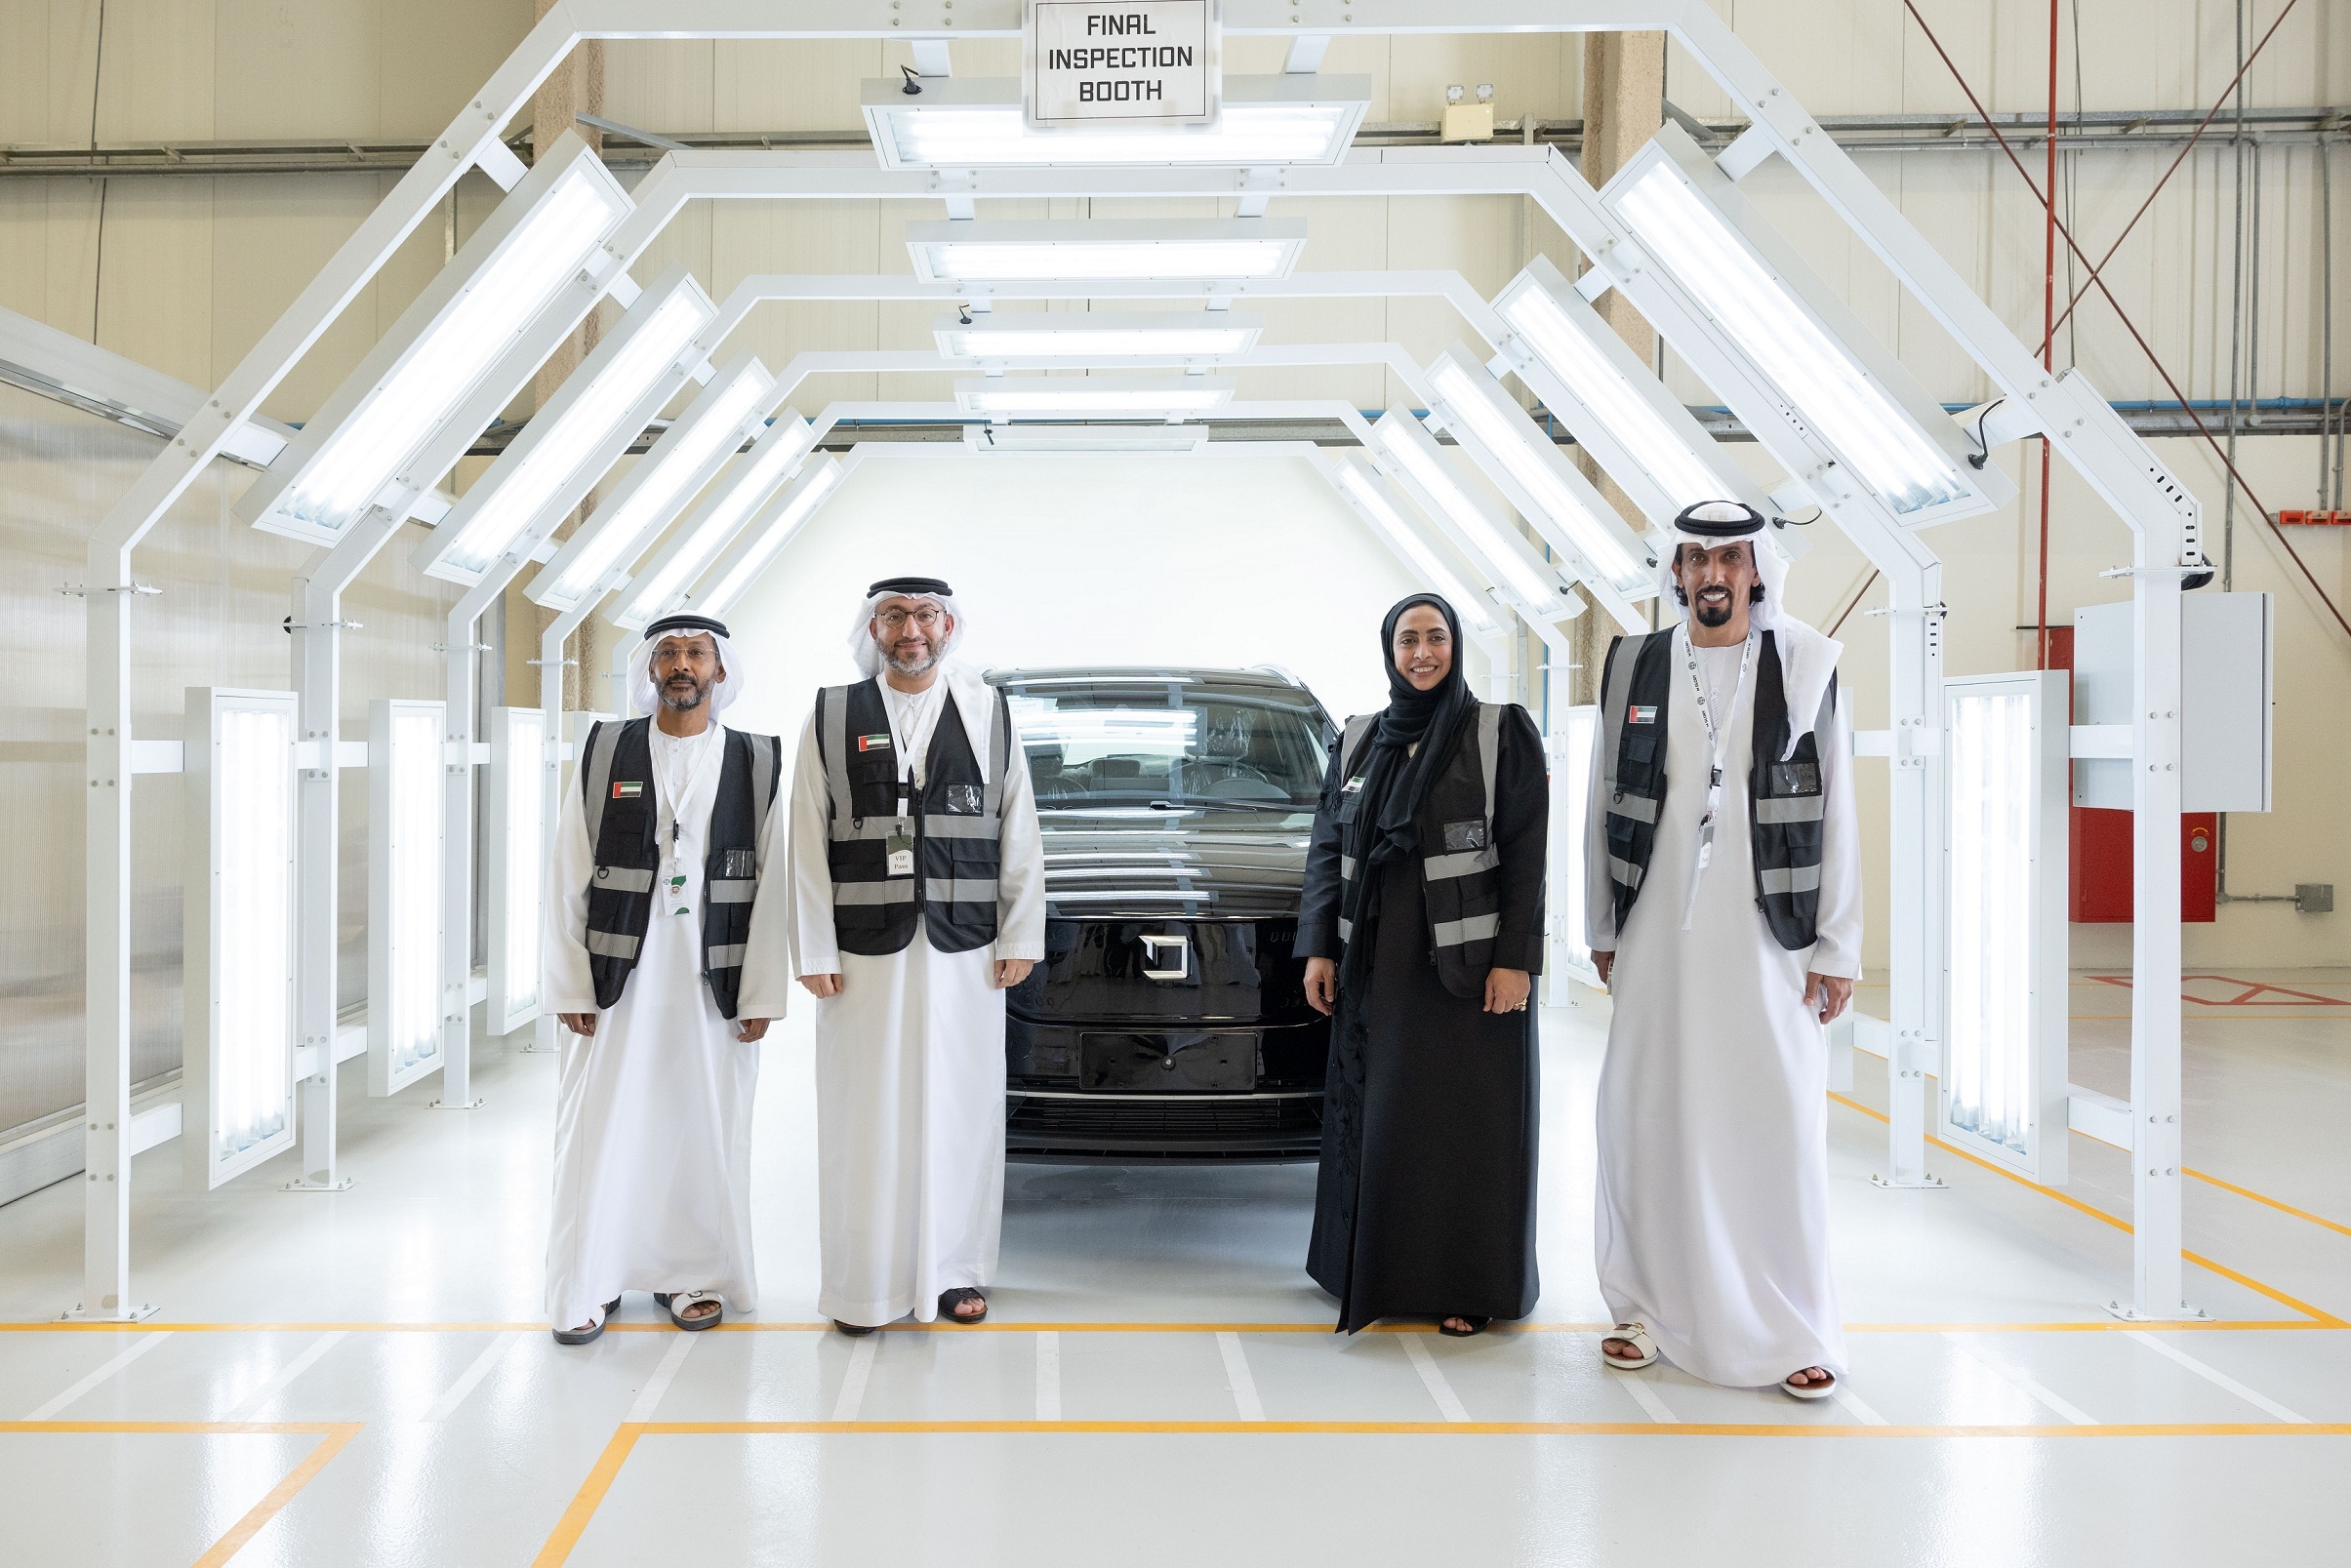 Dubai Industrial City announces the official opening of the Al Damani Electric Vehicle Manufacturing Factory by M Glory